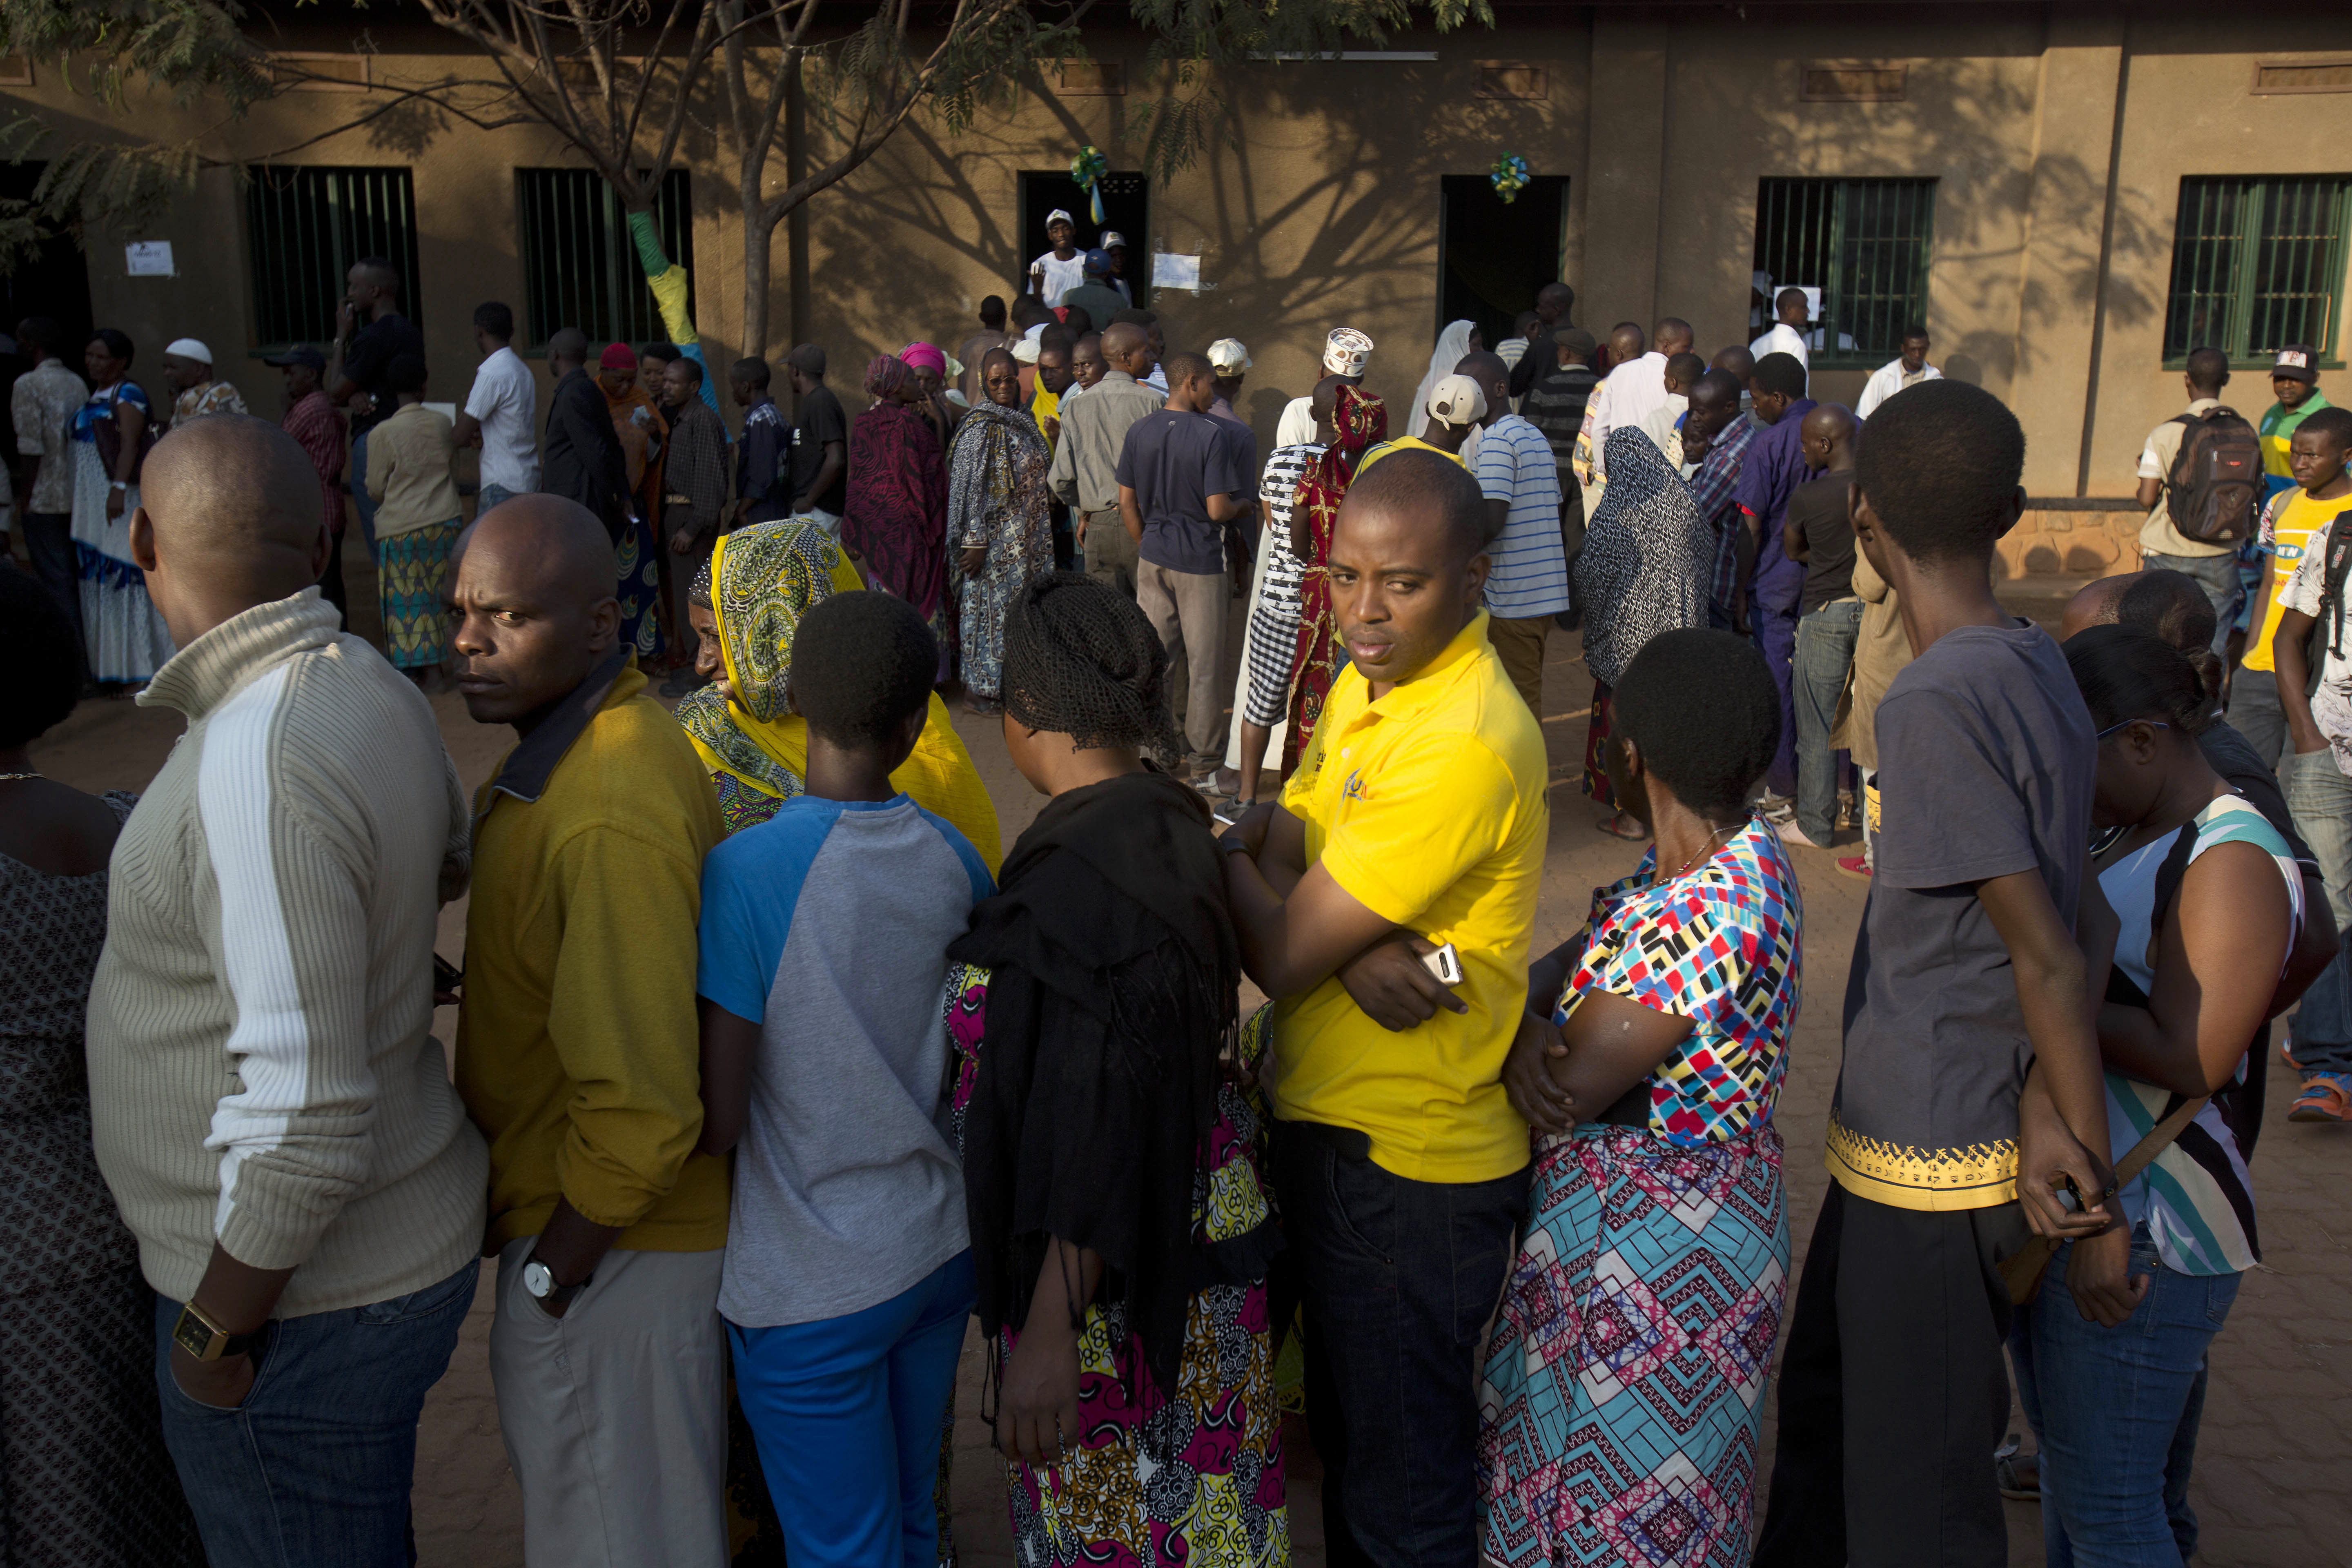 Rwandans line up to cast their vote for the presidential elections at a polling station in Rwanda's capital Kigali Friday, Aug. 4, 2017. Outgoing President Paul Kagame is widely expected to win another term after the government disqualified all but three candidates. (AP Photo/Jerome Delay)